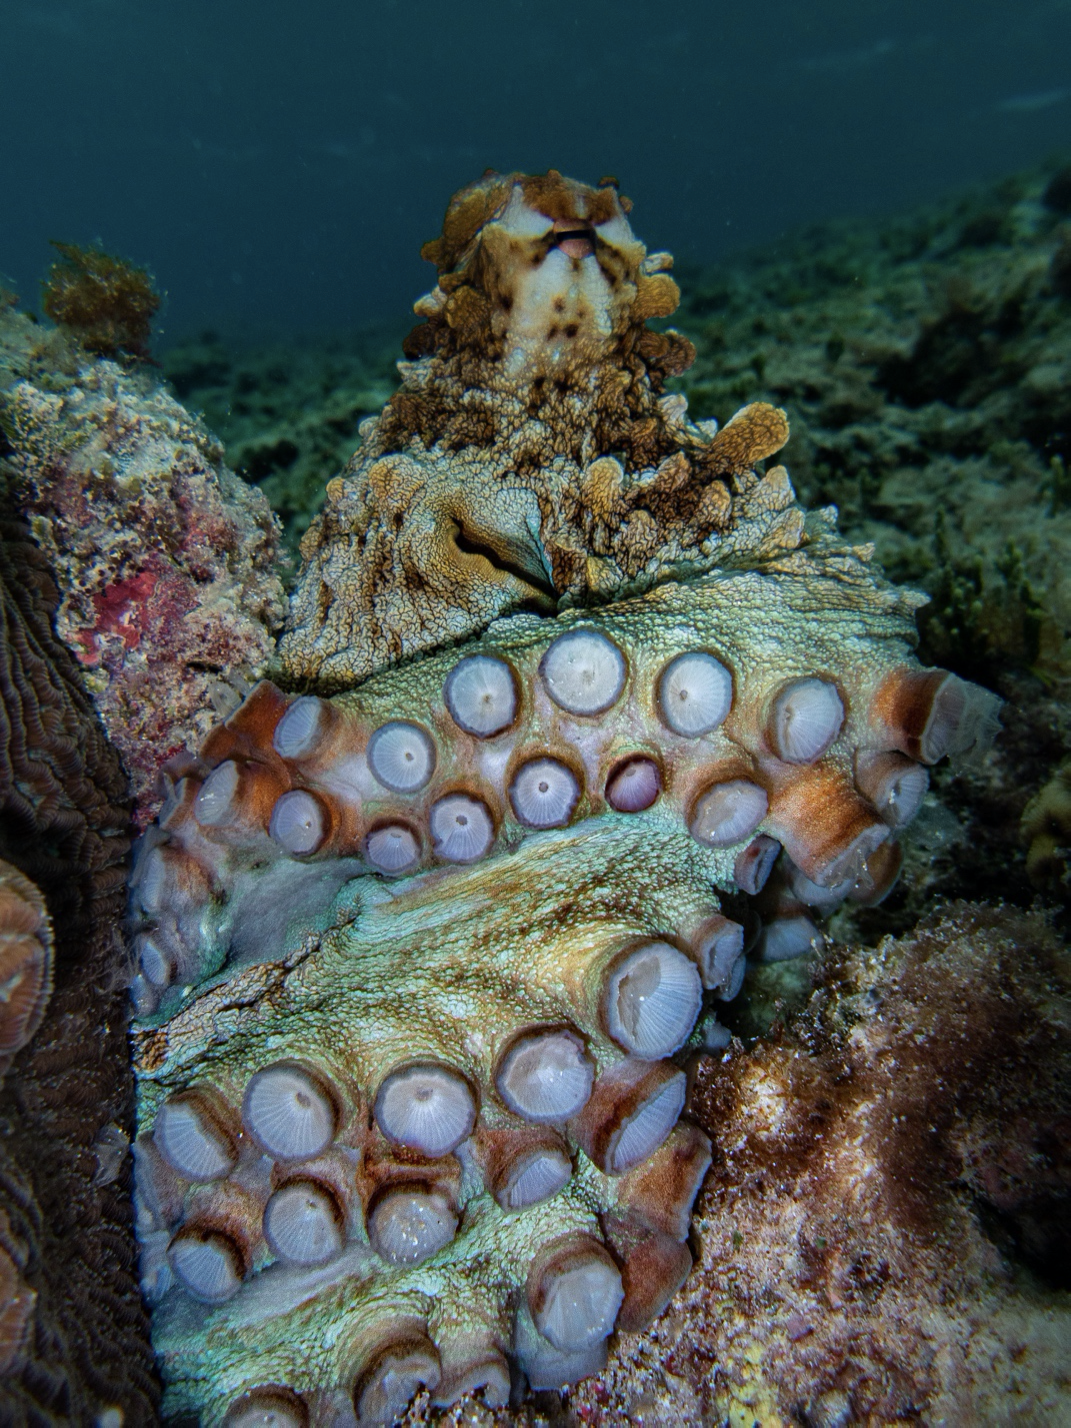 Ice cream cone Day Octopus spotted at Elizabeth Reef. Image by Tiffany Dun